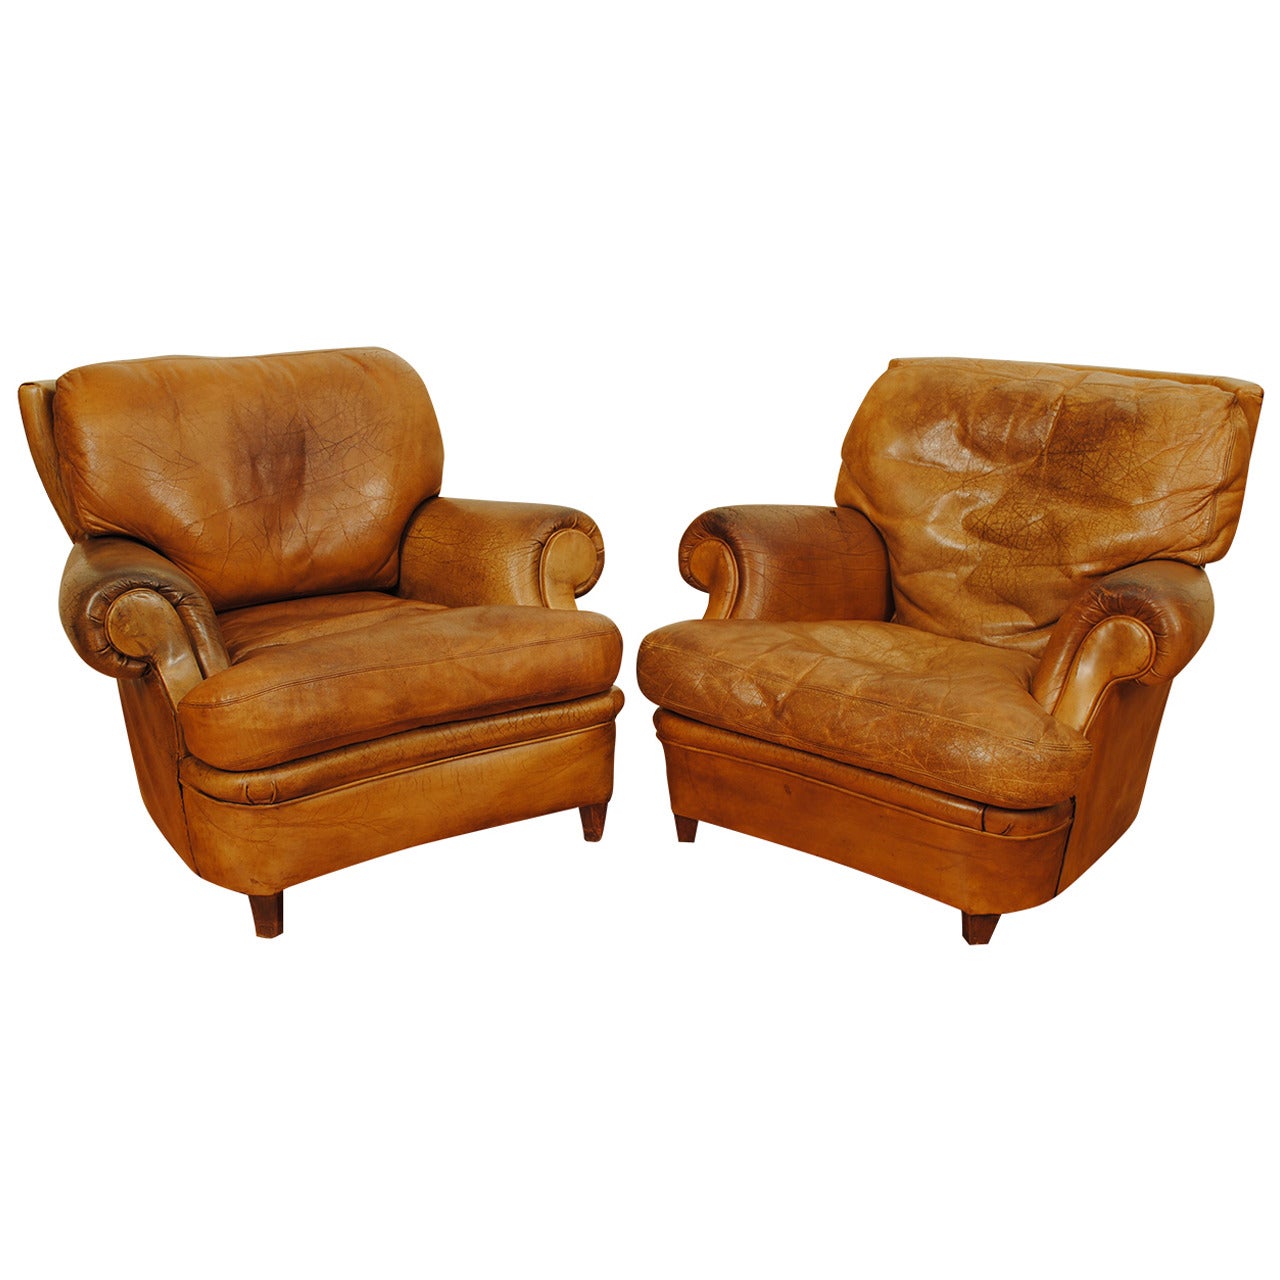 Near Pair of French Leather Upholstered Club Chairs